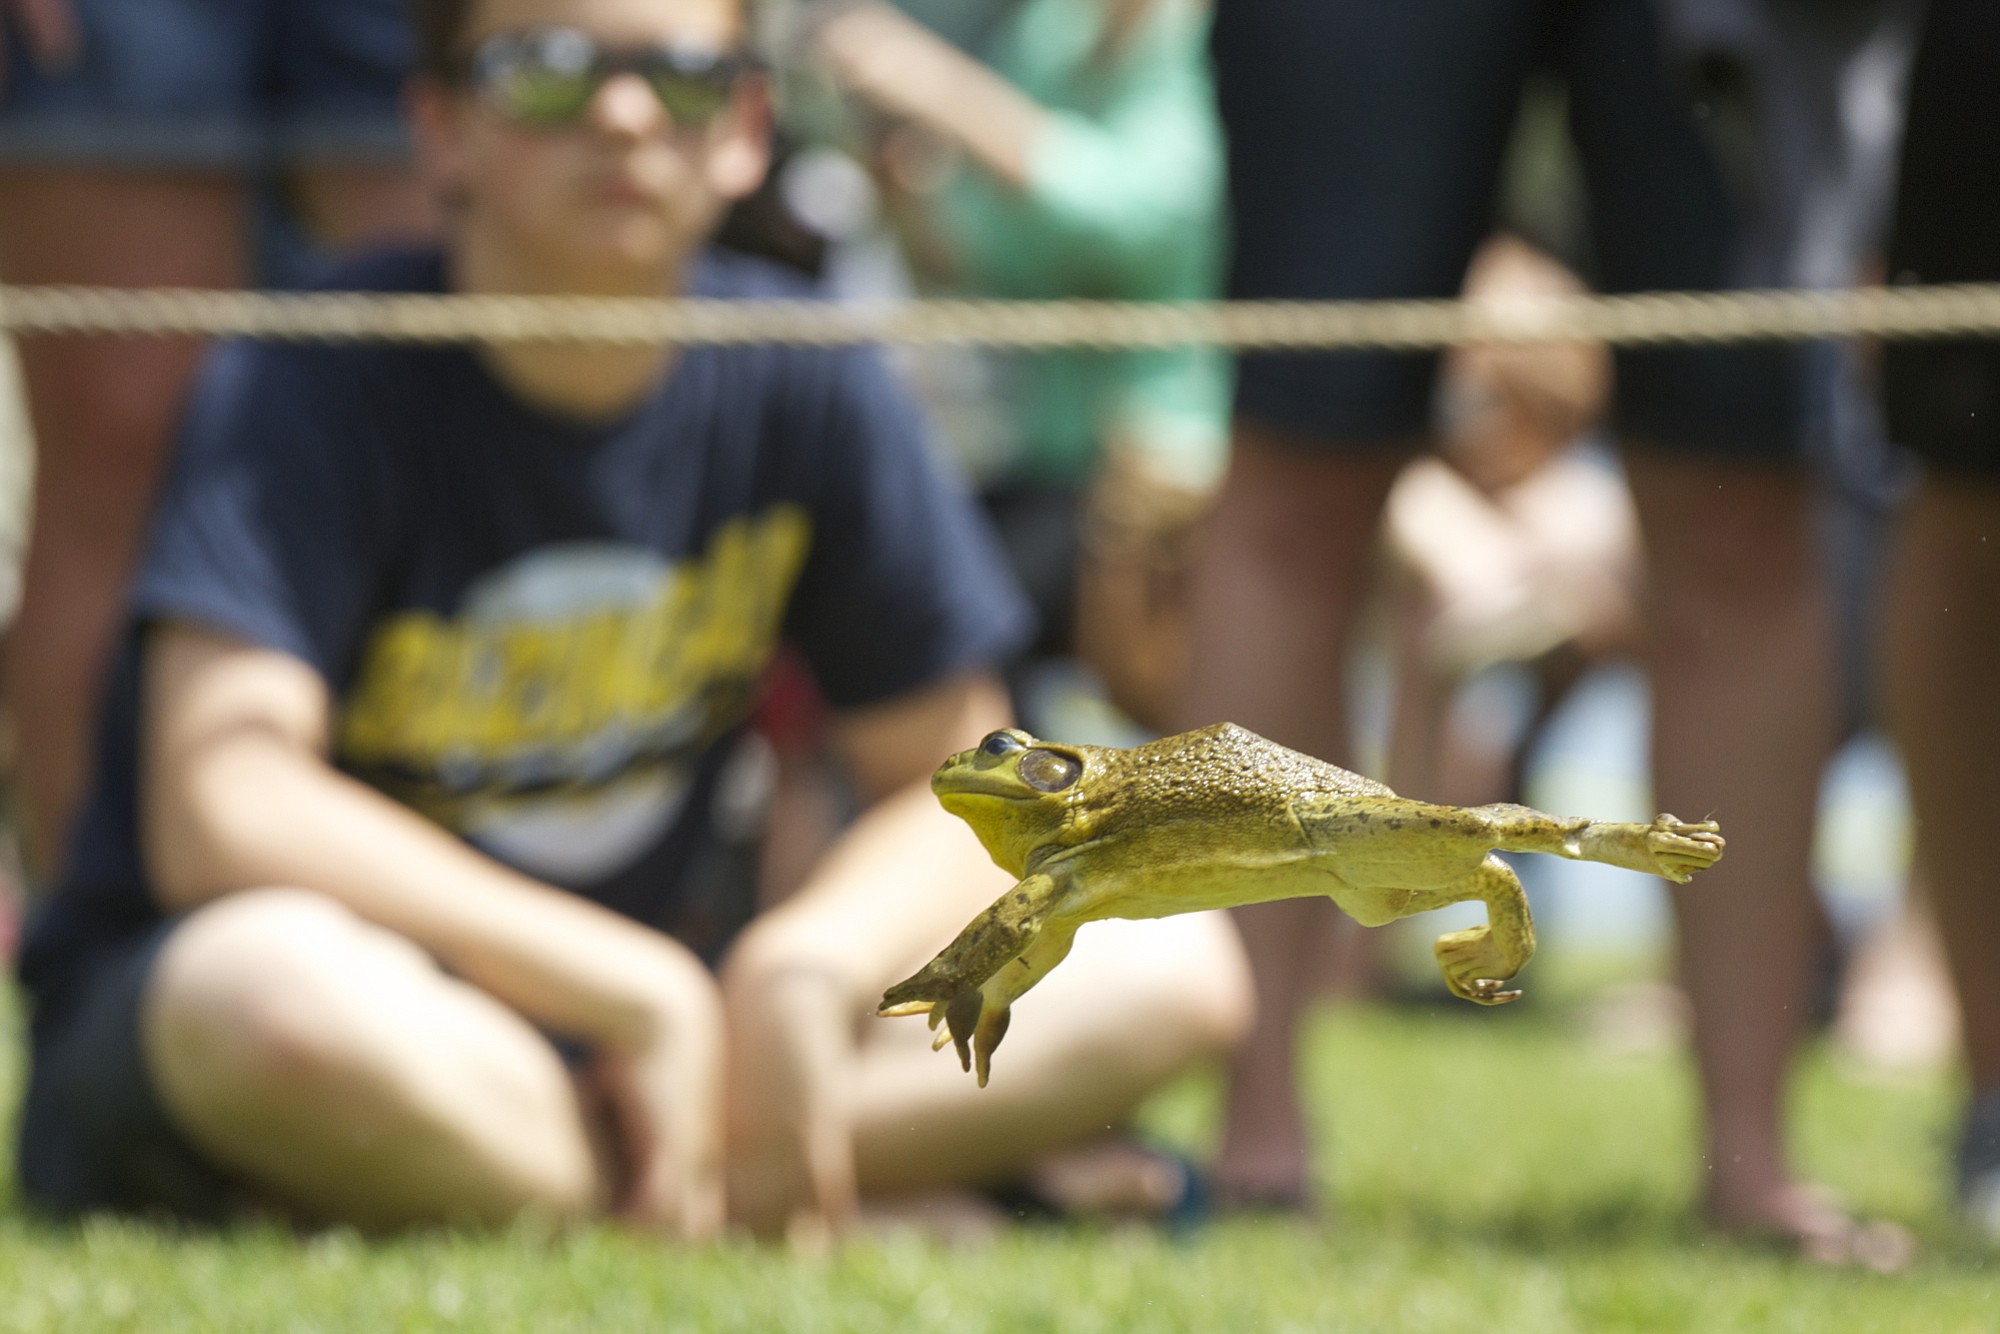 WOODLAND: A frog jumps for glory during the annual Frog Jump competition during the 2013 Planters Days celebration in Woodland.